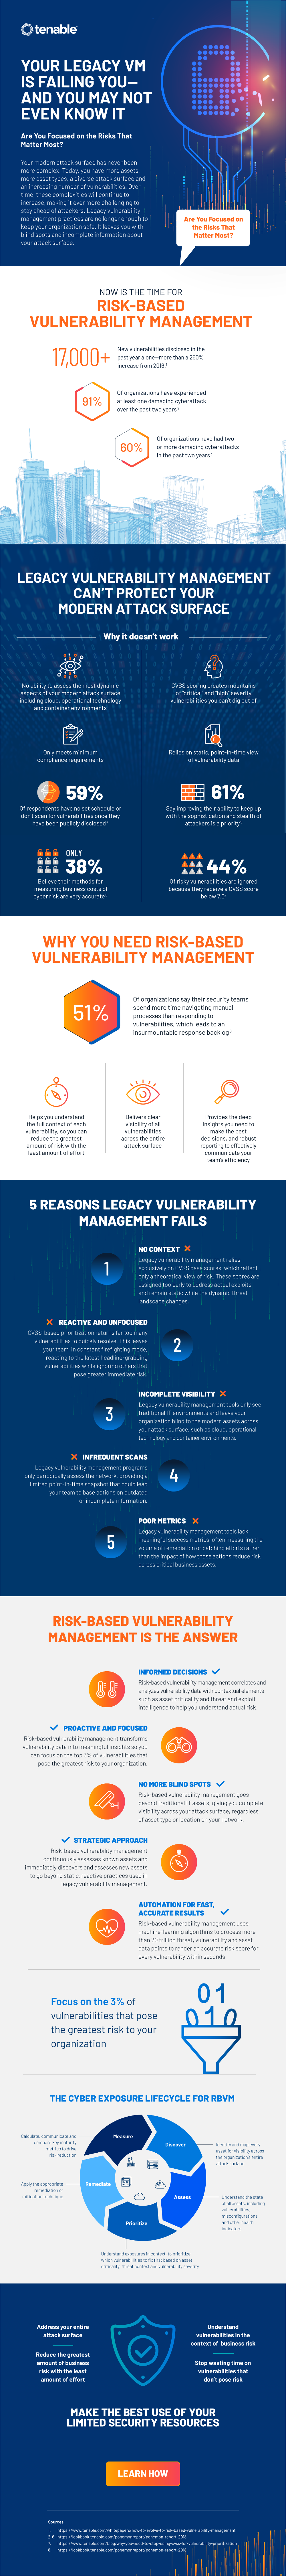 Your Legacy VM is Failing You - And You May Not Even Know It